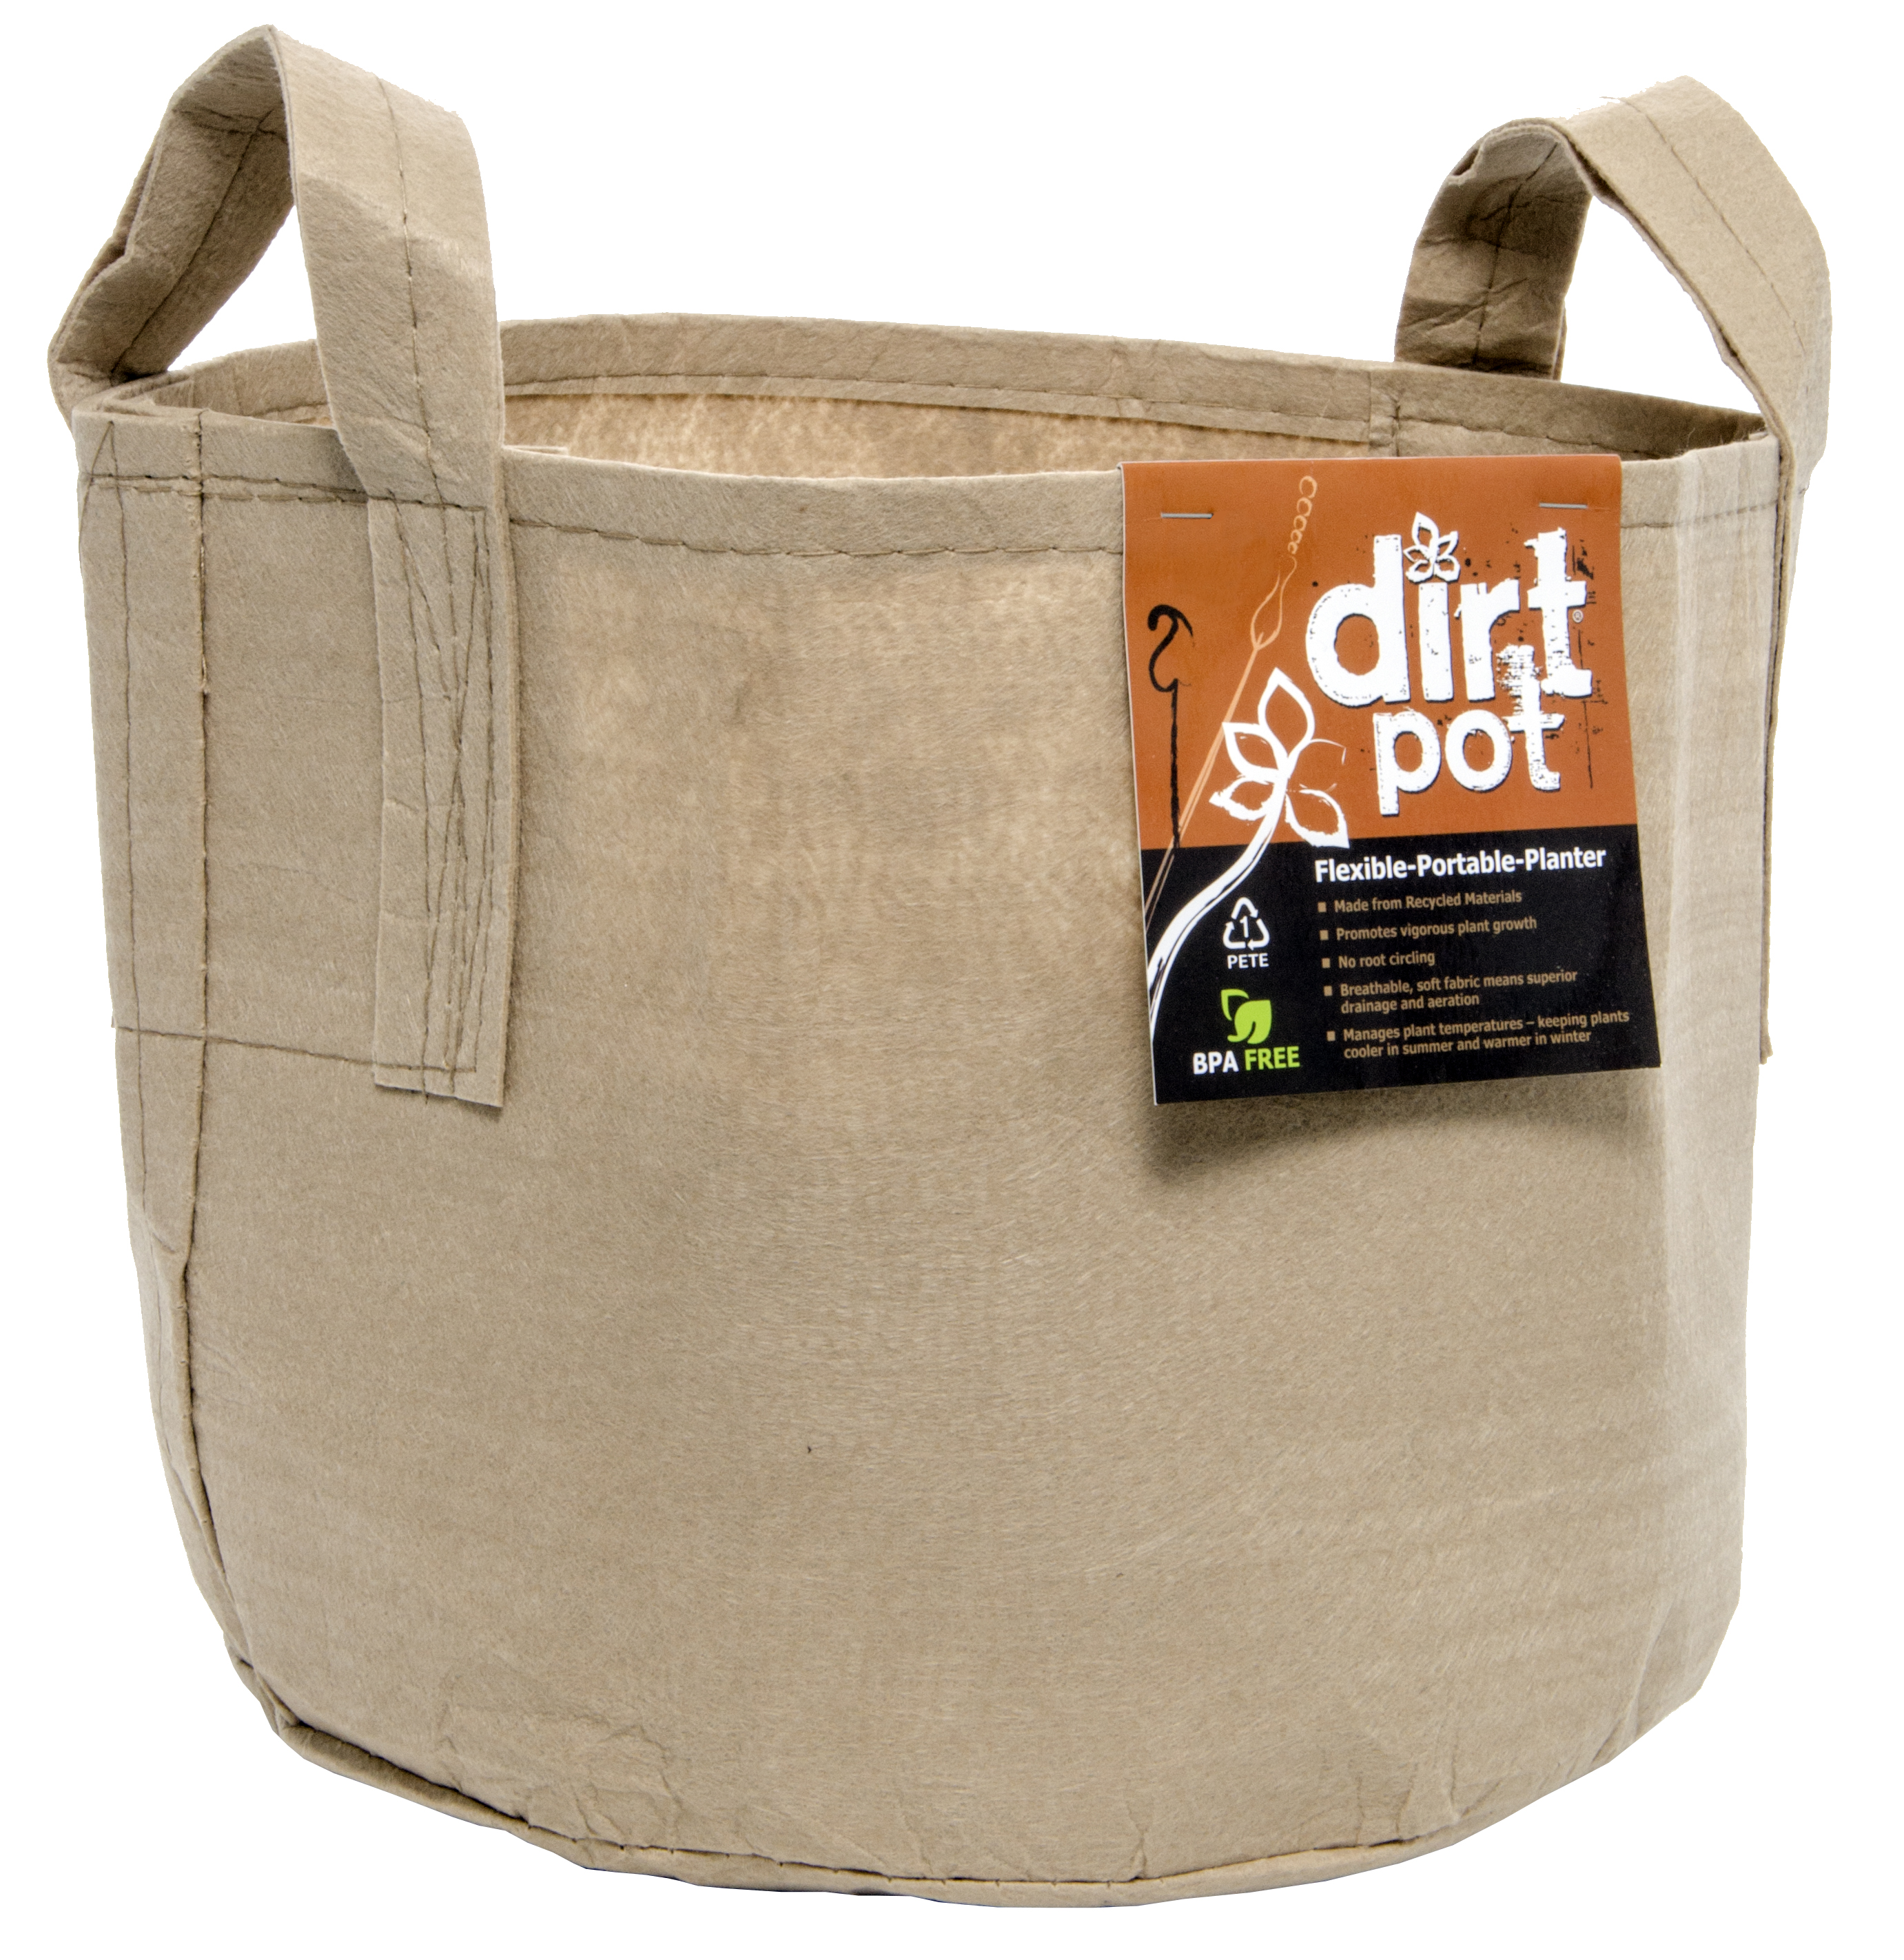 Picture for Dirt Pot Flexible Portable Planter, Tan, 15 gal, with handles